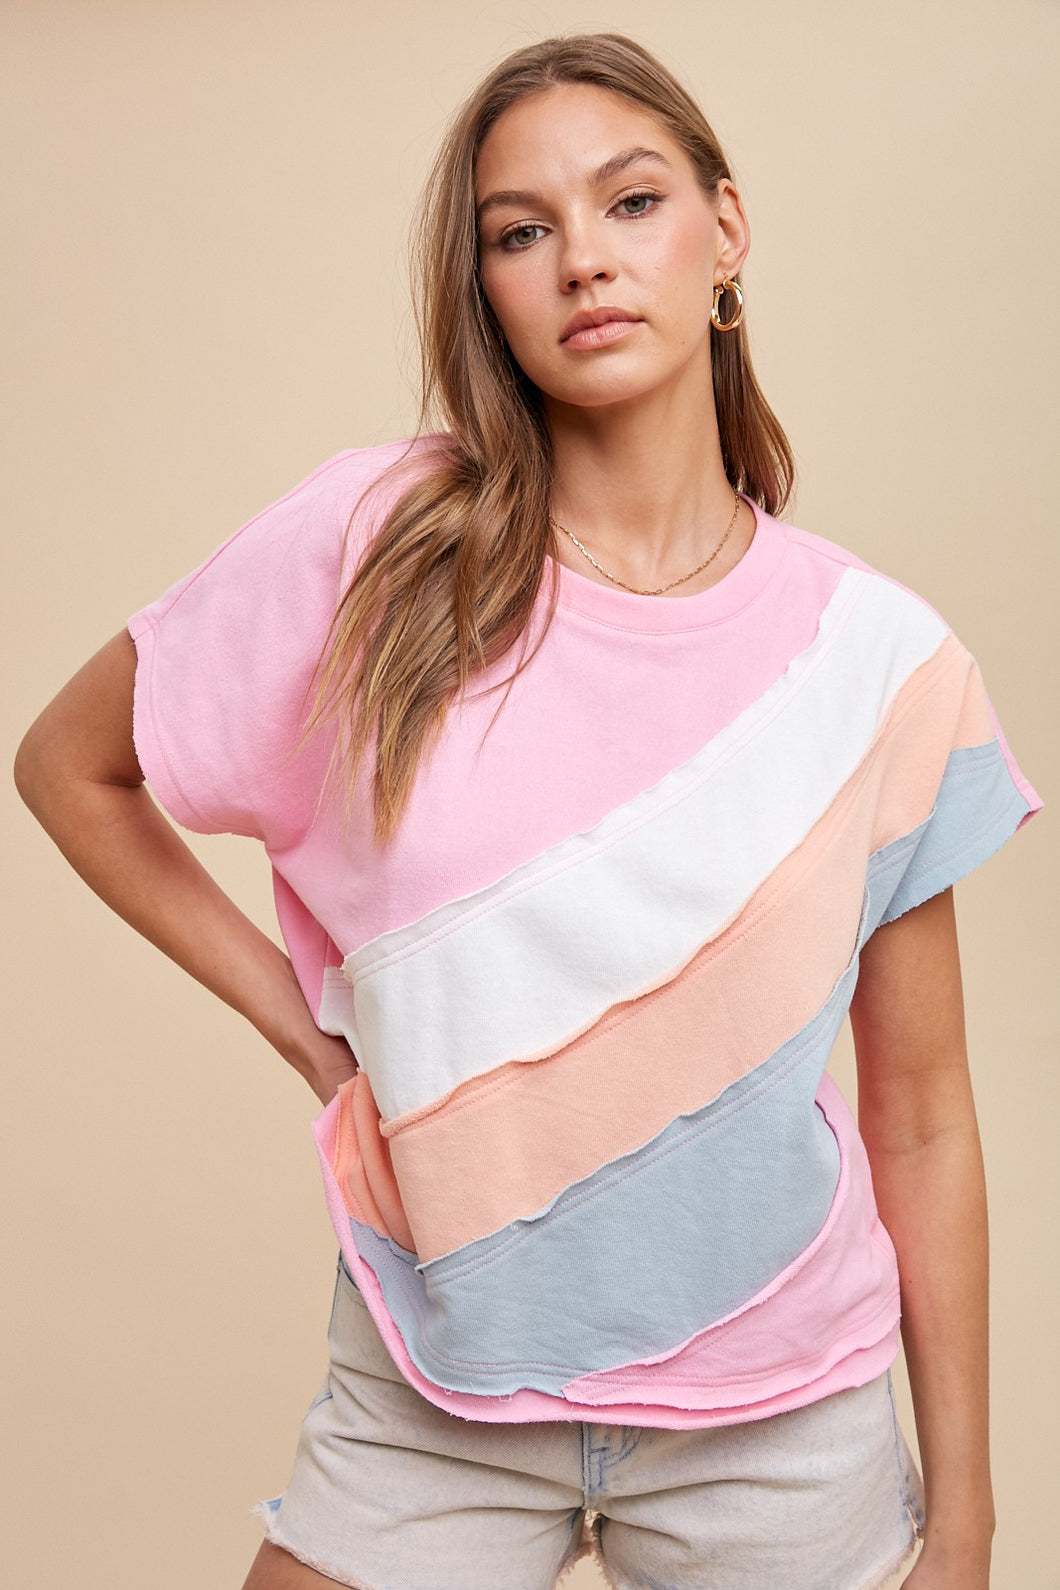 AnnieWear Asymmetrical Color Block Top in Candy Pink Combo Shirts & Tops AnnieWear   